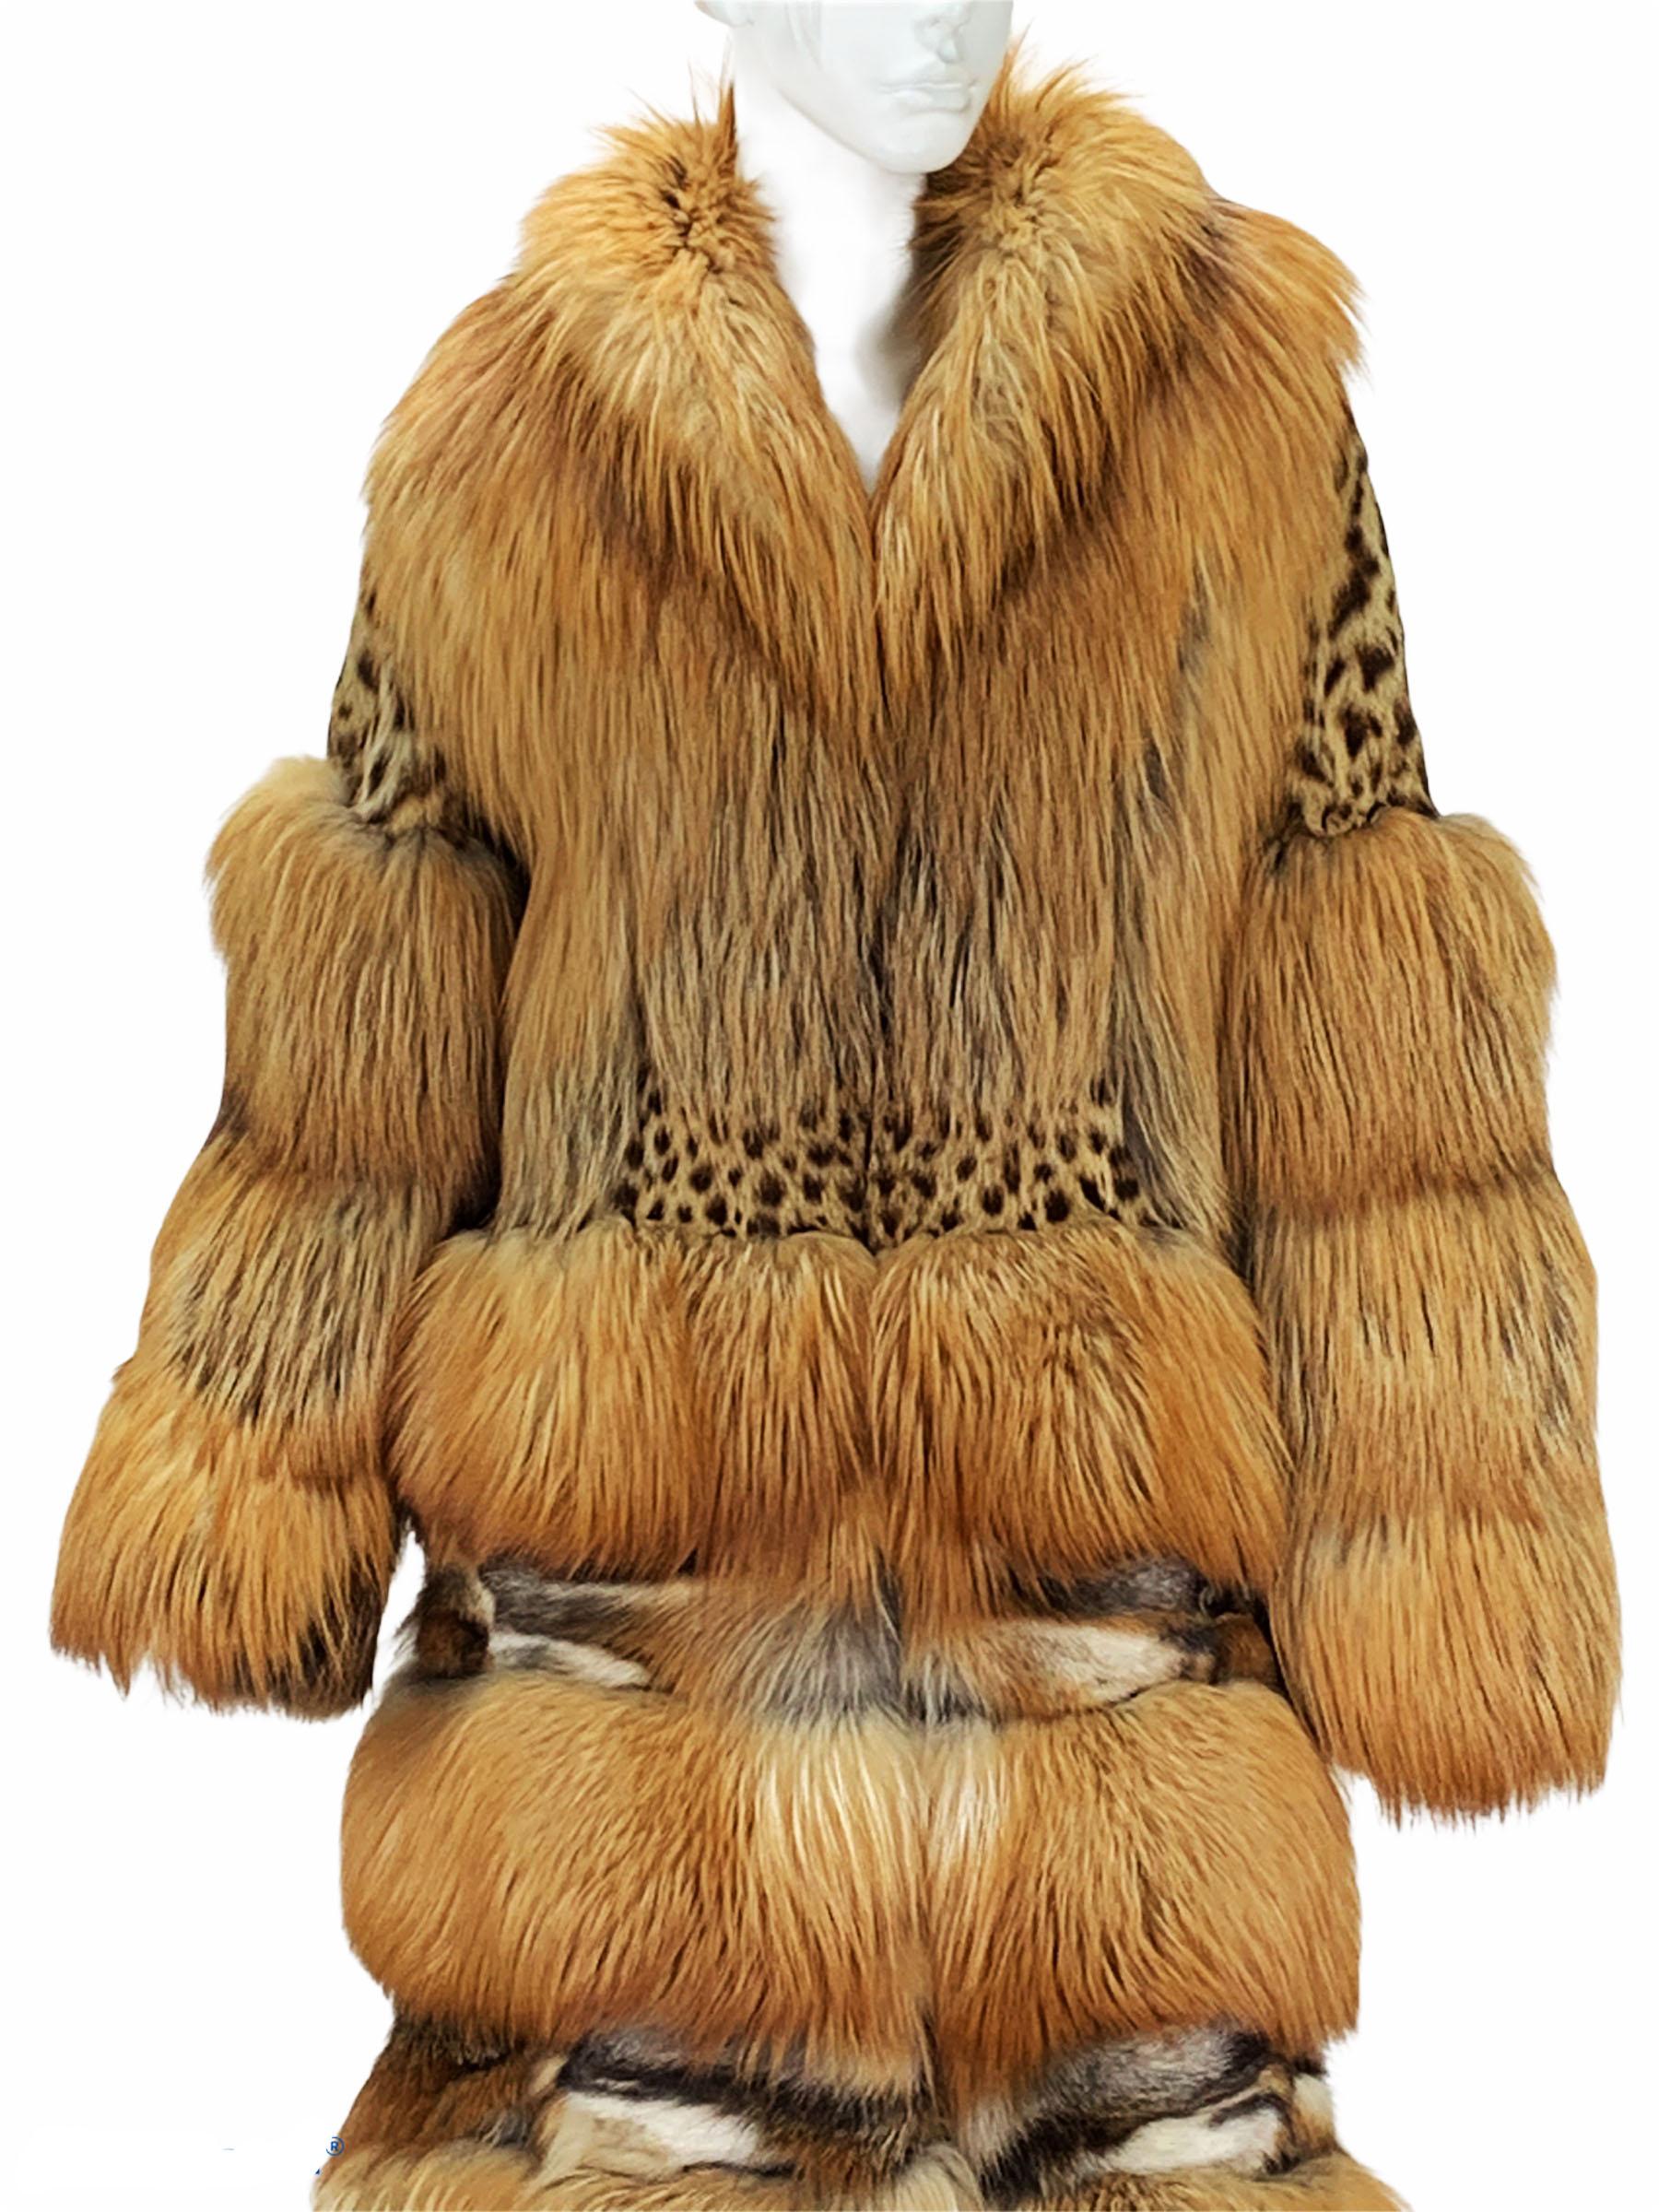 Museum Tom Ford for Gucci Runway F/W 1999 2 in 1 Fur Coat Jacket  For Sale 3